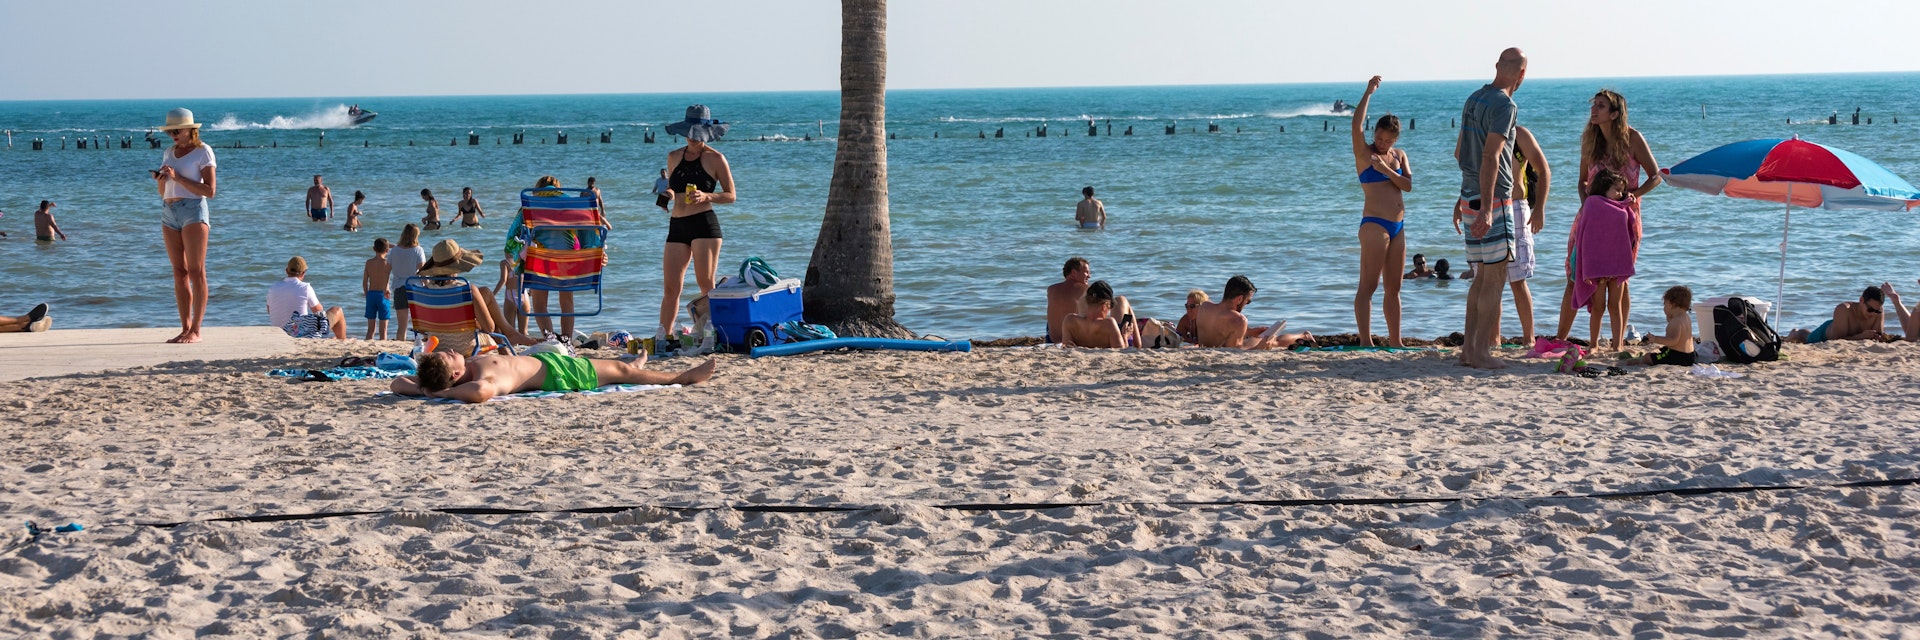 Men and women enjoy a sunny day on the sand at Higgs Beach in Key West, Florida. (January 4, 2019)